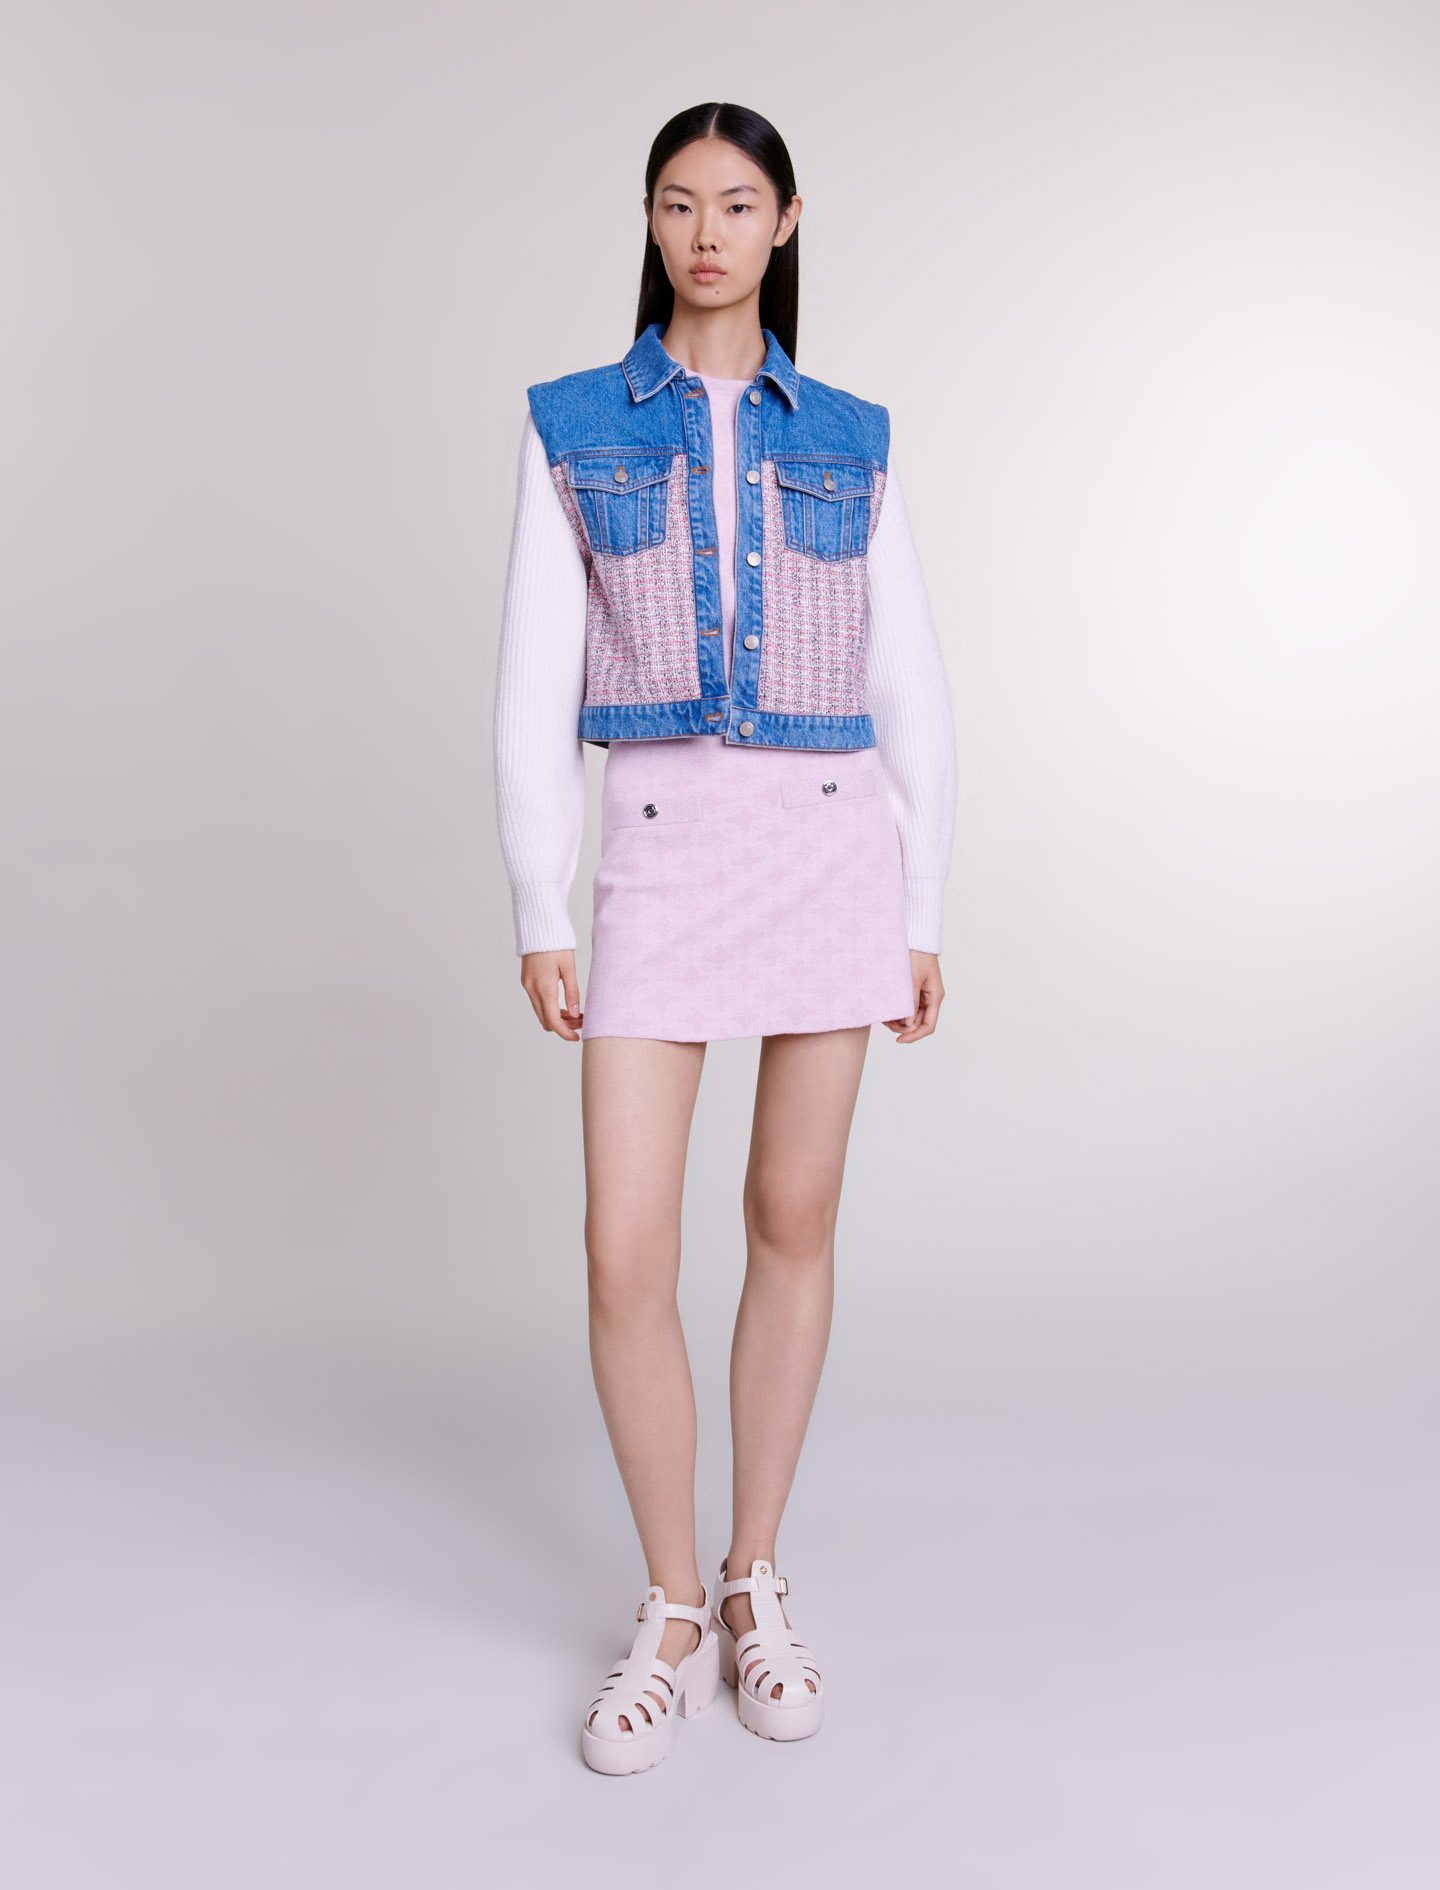 Maje Woman's cotton, Denim and tweed cropped jacket for Spring/Summer, in color Pink/Ecru /